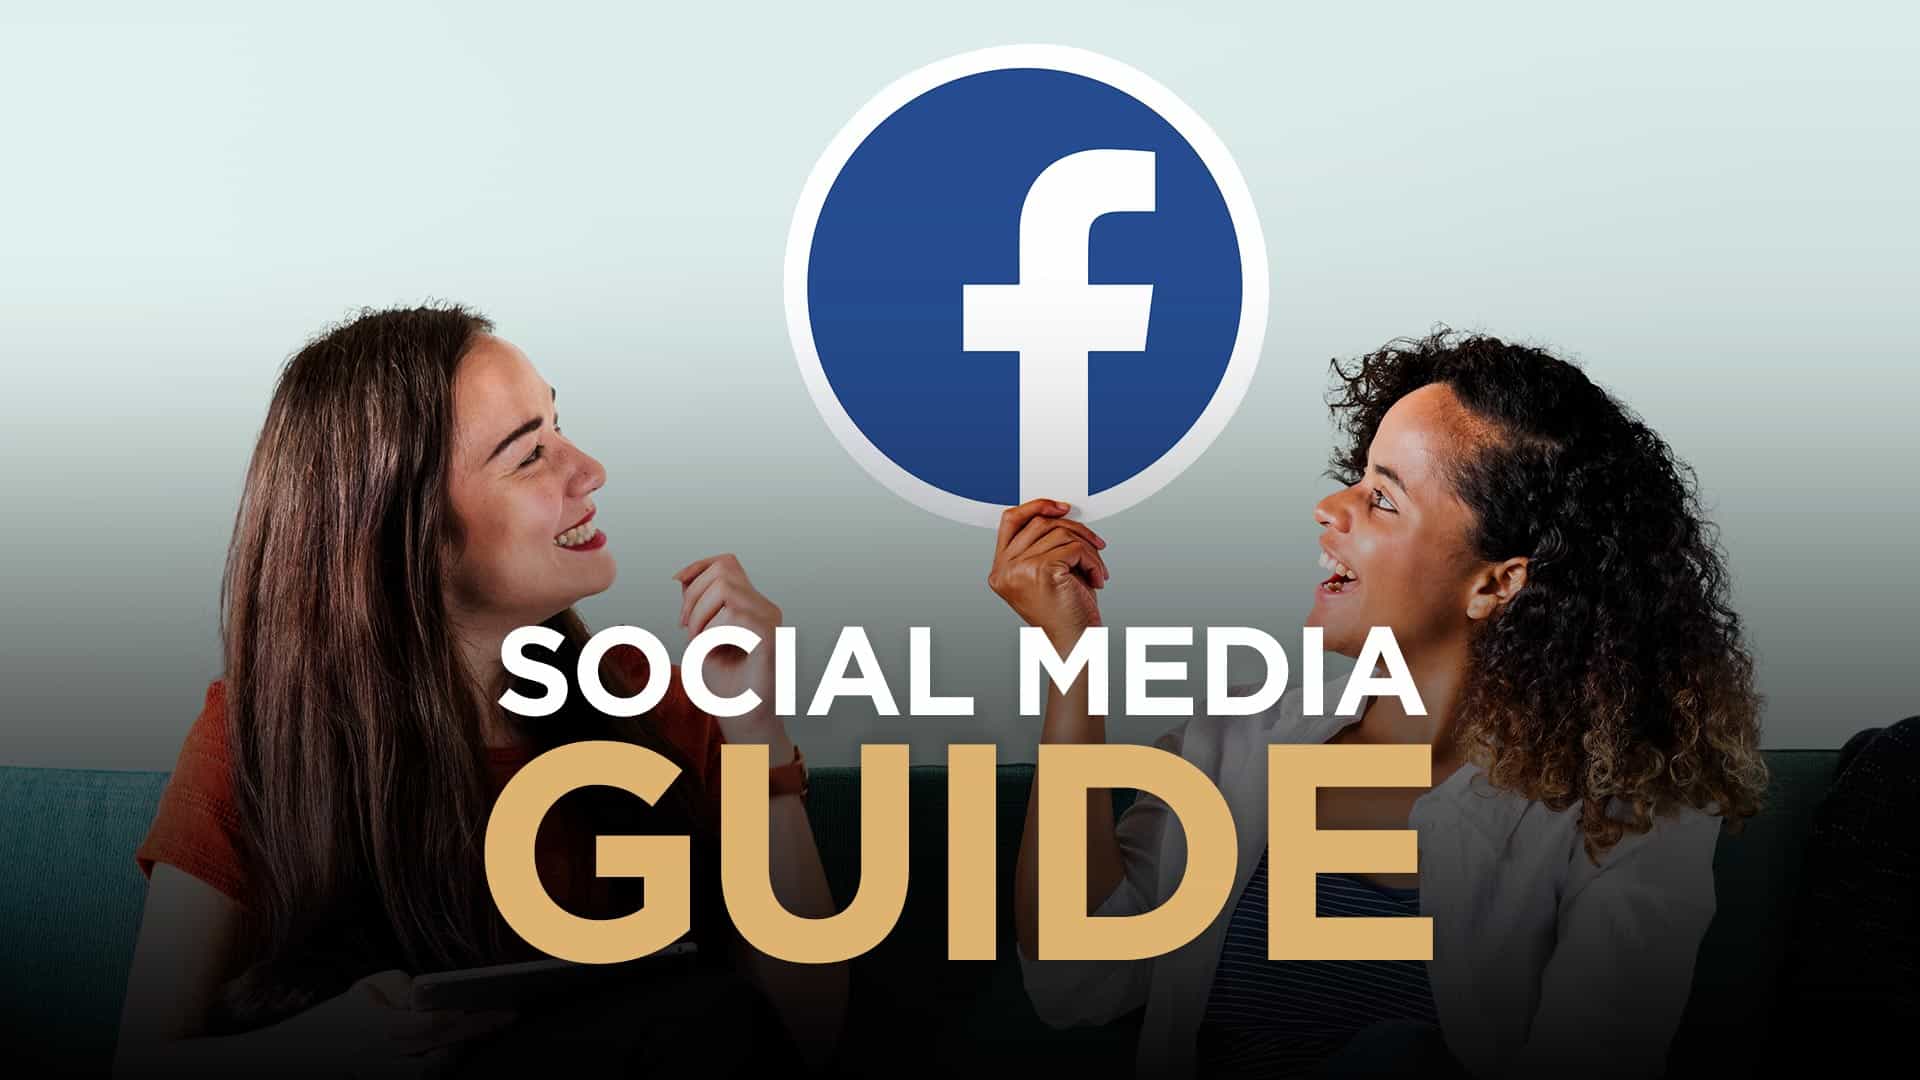 Social media guide feature image